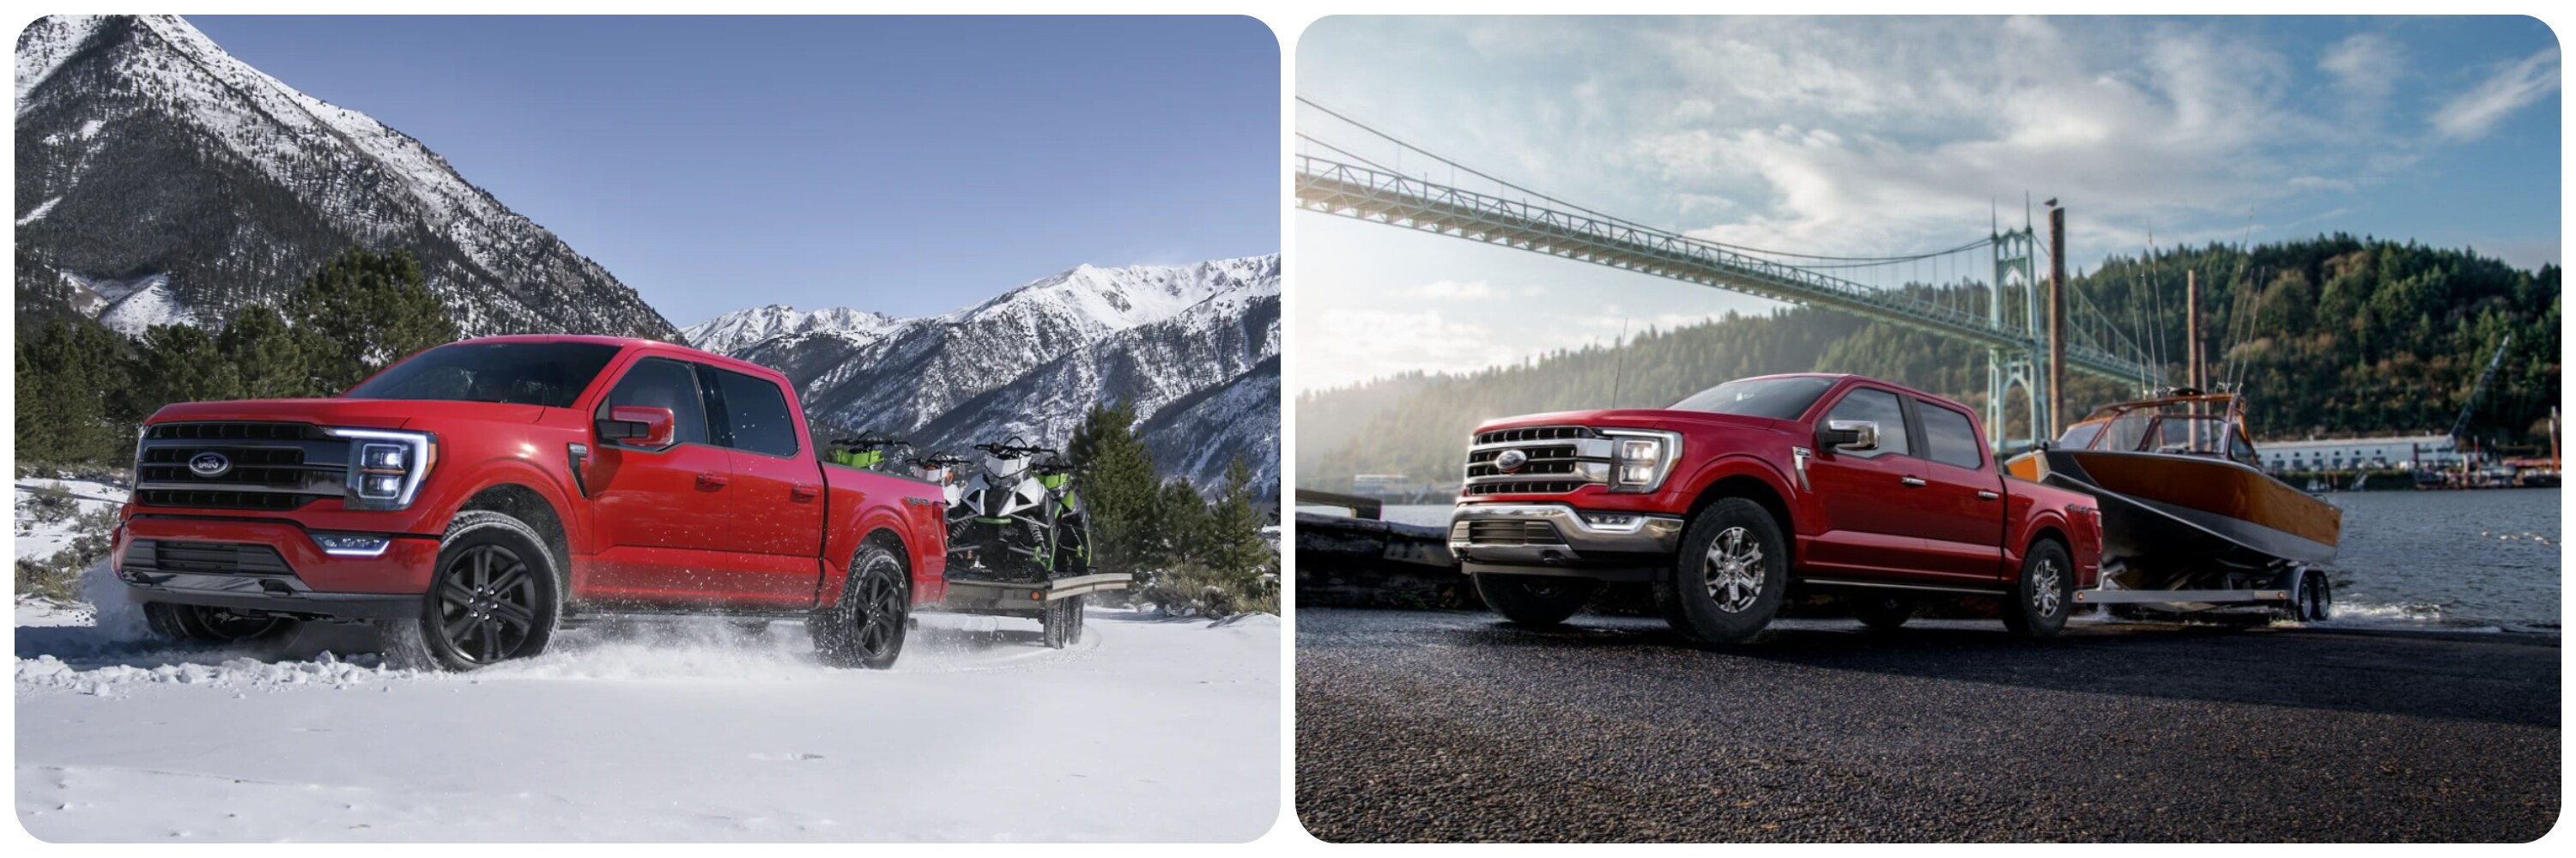 On the right, a red 2022 Ford F-150 drives through a snowy mountain field hauling snowmobiles behind. On the right a red 2021 Ford F-150 is dropping a speedboat off in a lake.